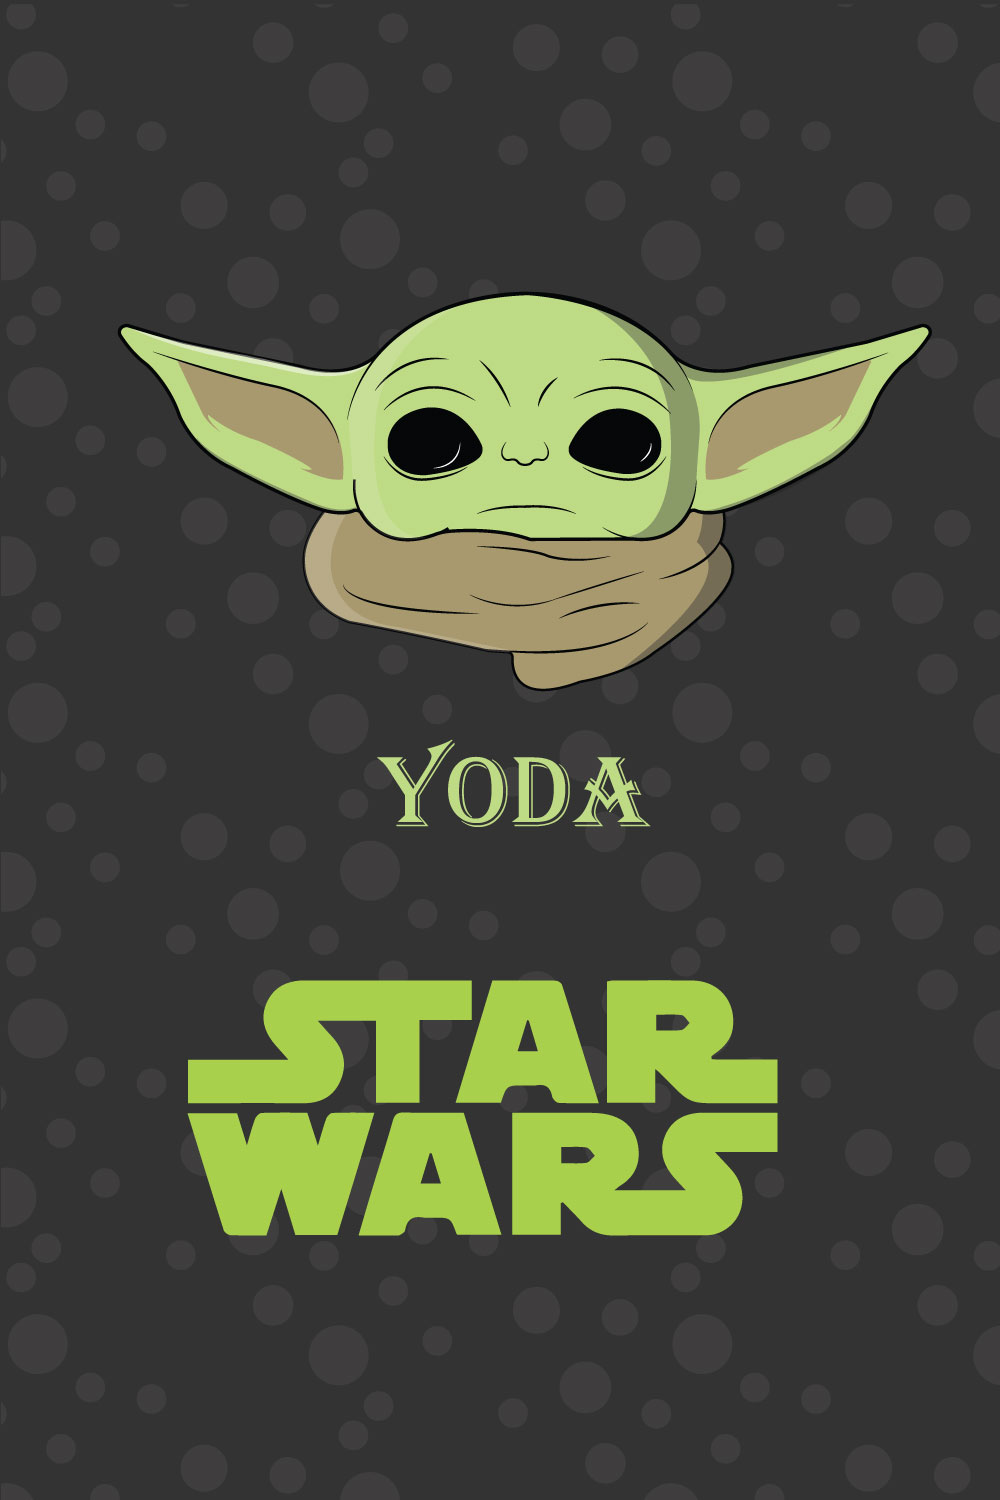 Yoda face from Star wars vector design pinterest preview image.